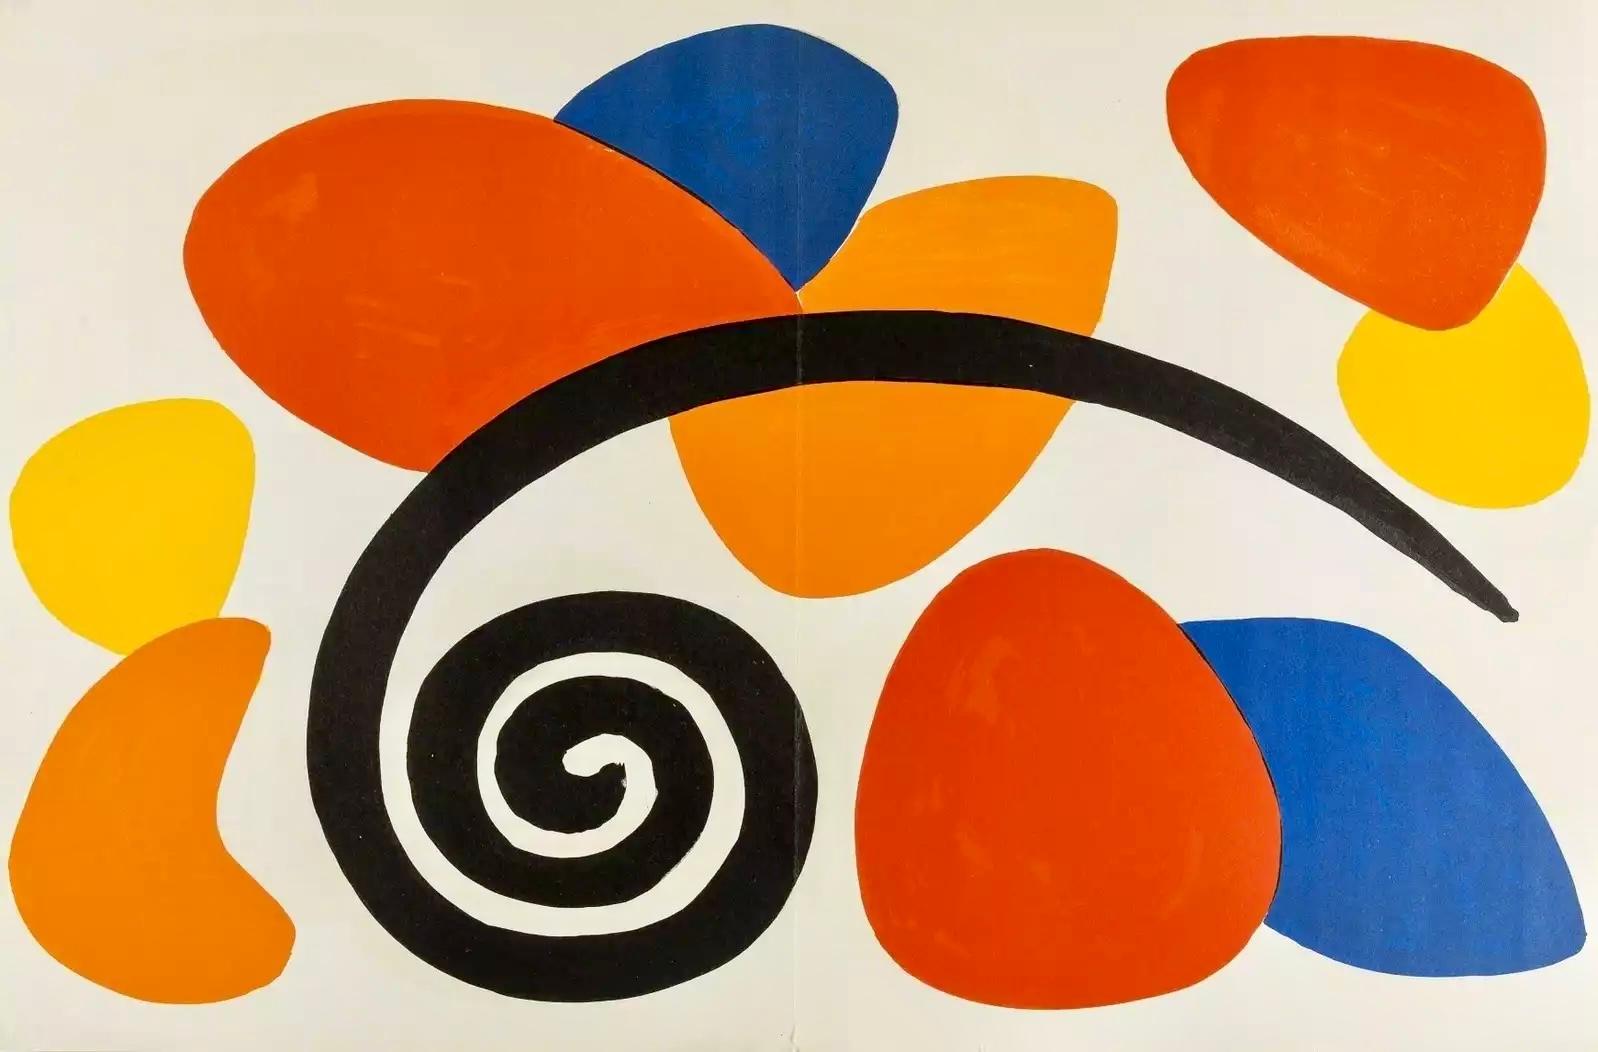 Alexander Calder Lithograph c. 1967 from Derrière le miroir:

Lithograph in colors; 15 x 22 inches.
Very good overall vintage condition; contains center fold-line as originally issued; very well preserved. 
Unsigned from an edition of unknown.
From: